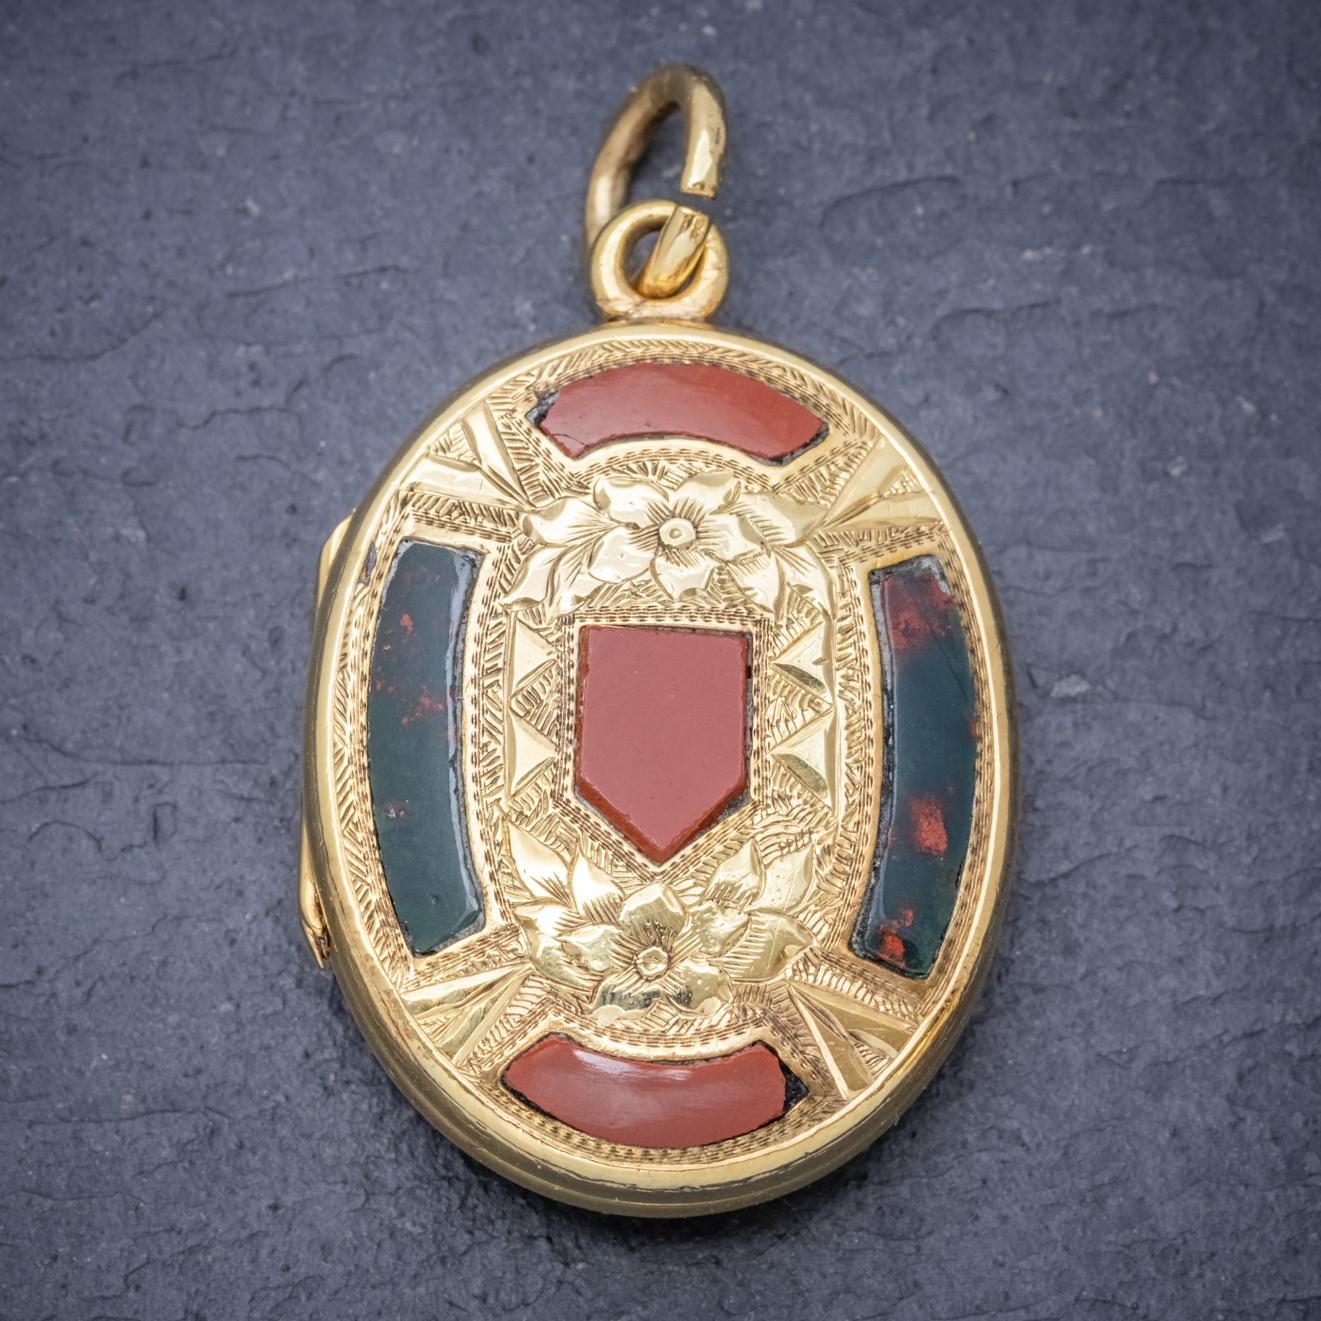 A wonderful antique Scottish Mourning locket from the Victorian era featuring beautiful engraved artistry on both sides with floral motifs displayed around lovely Jasper and Carnelian stones. 

The locket opens up to reveal beautiful plaited hair